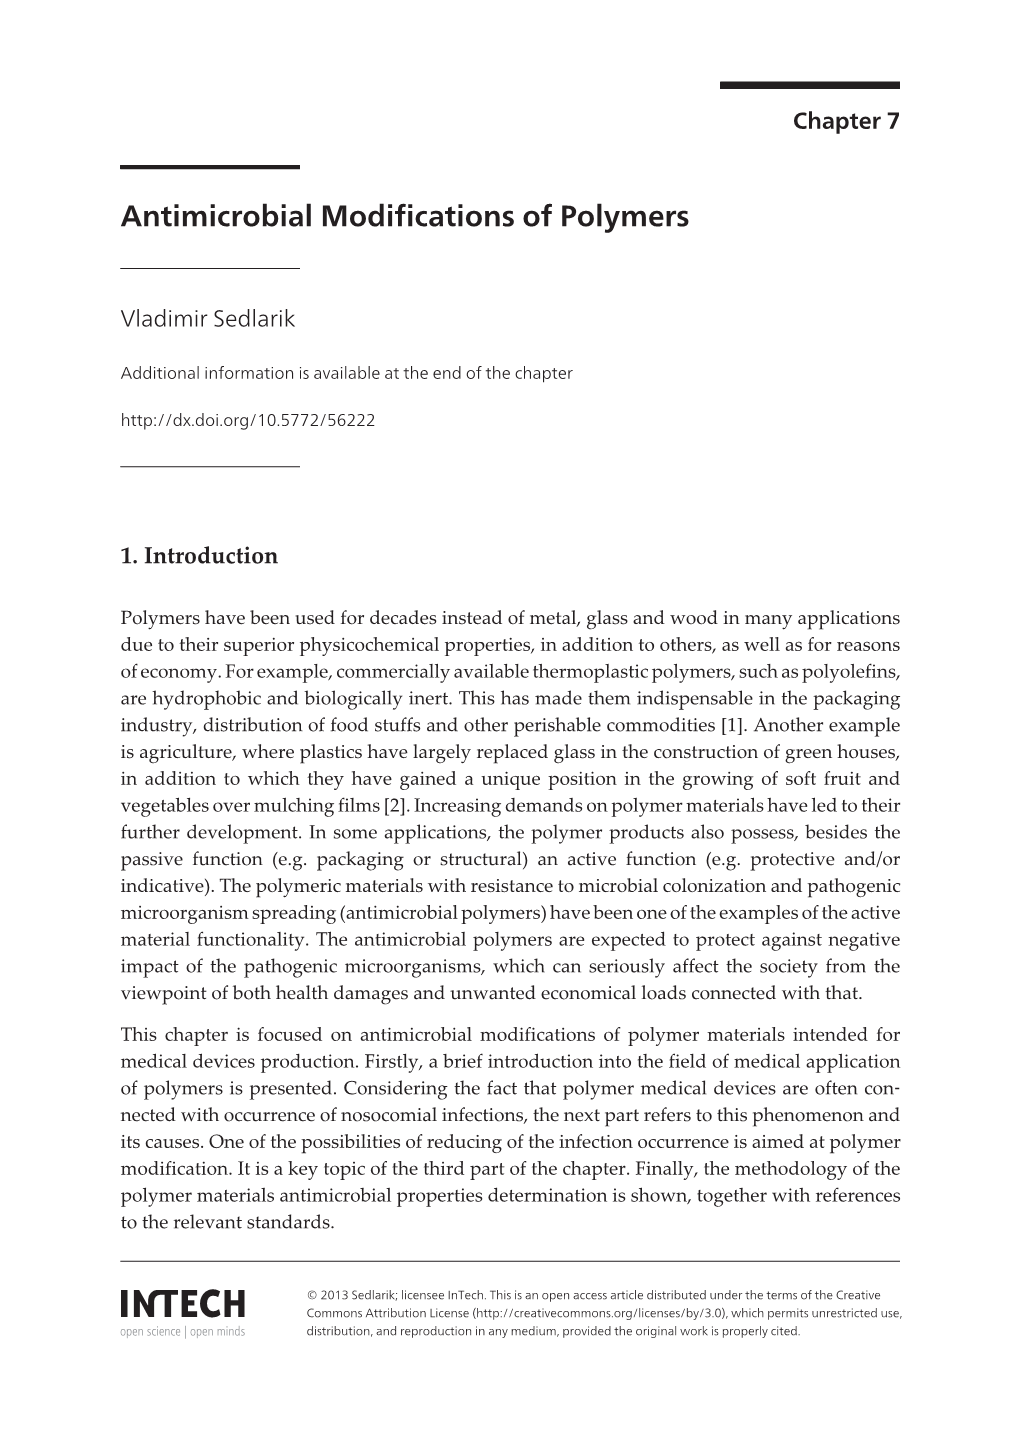 Antimicrobial Modifications of Polymers